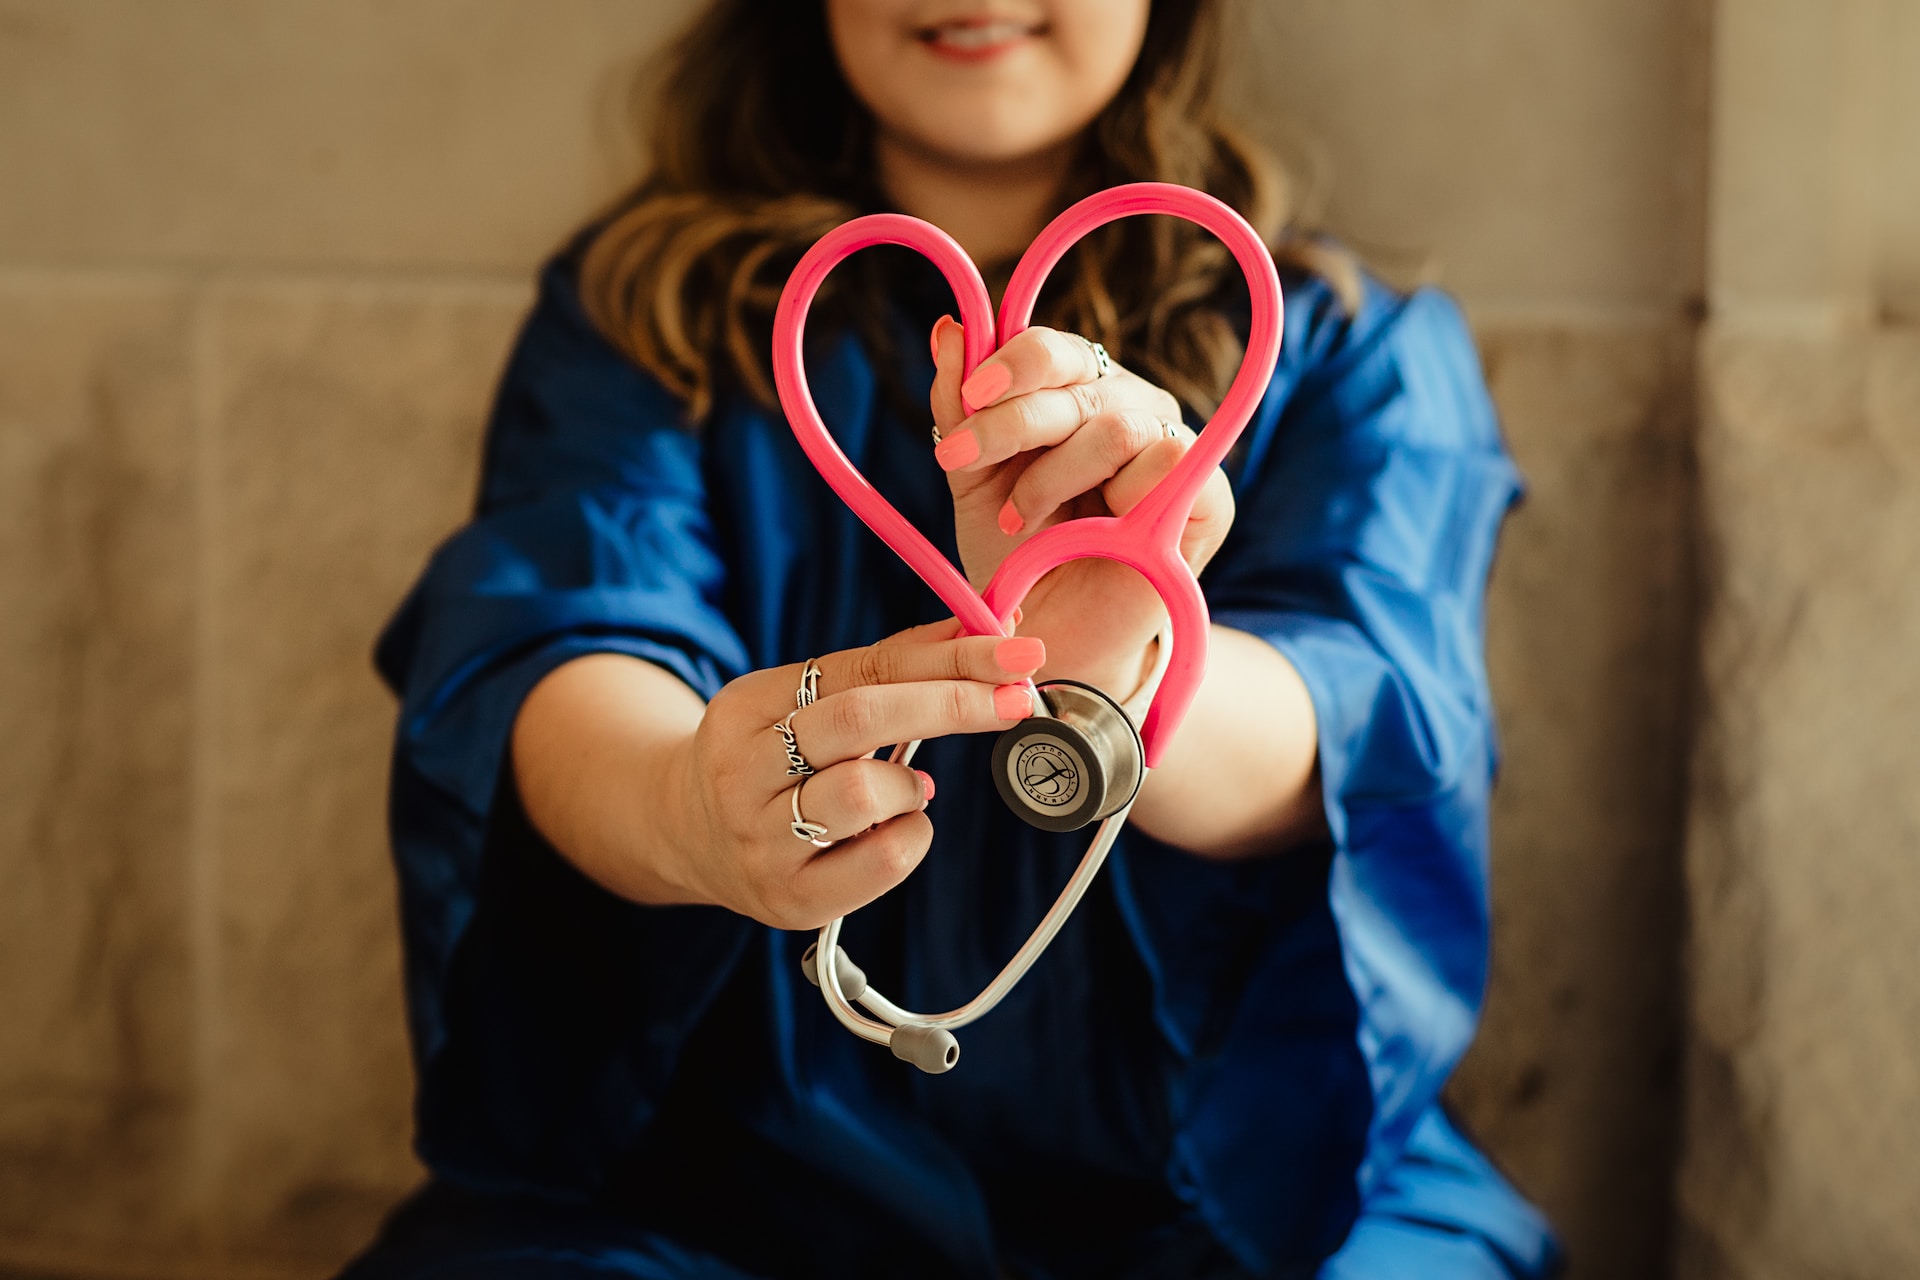 Doctor holding a stethoscope in the shape of a heart